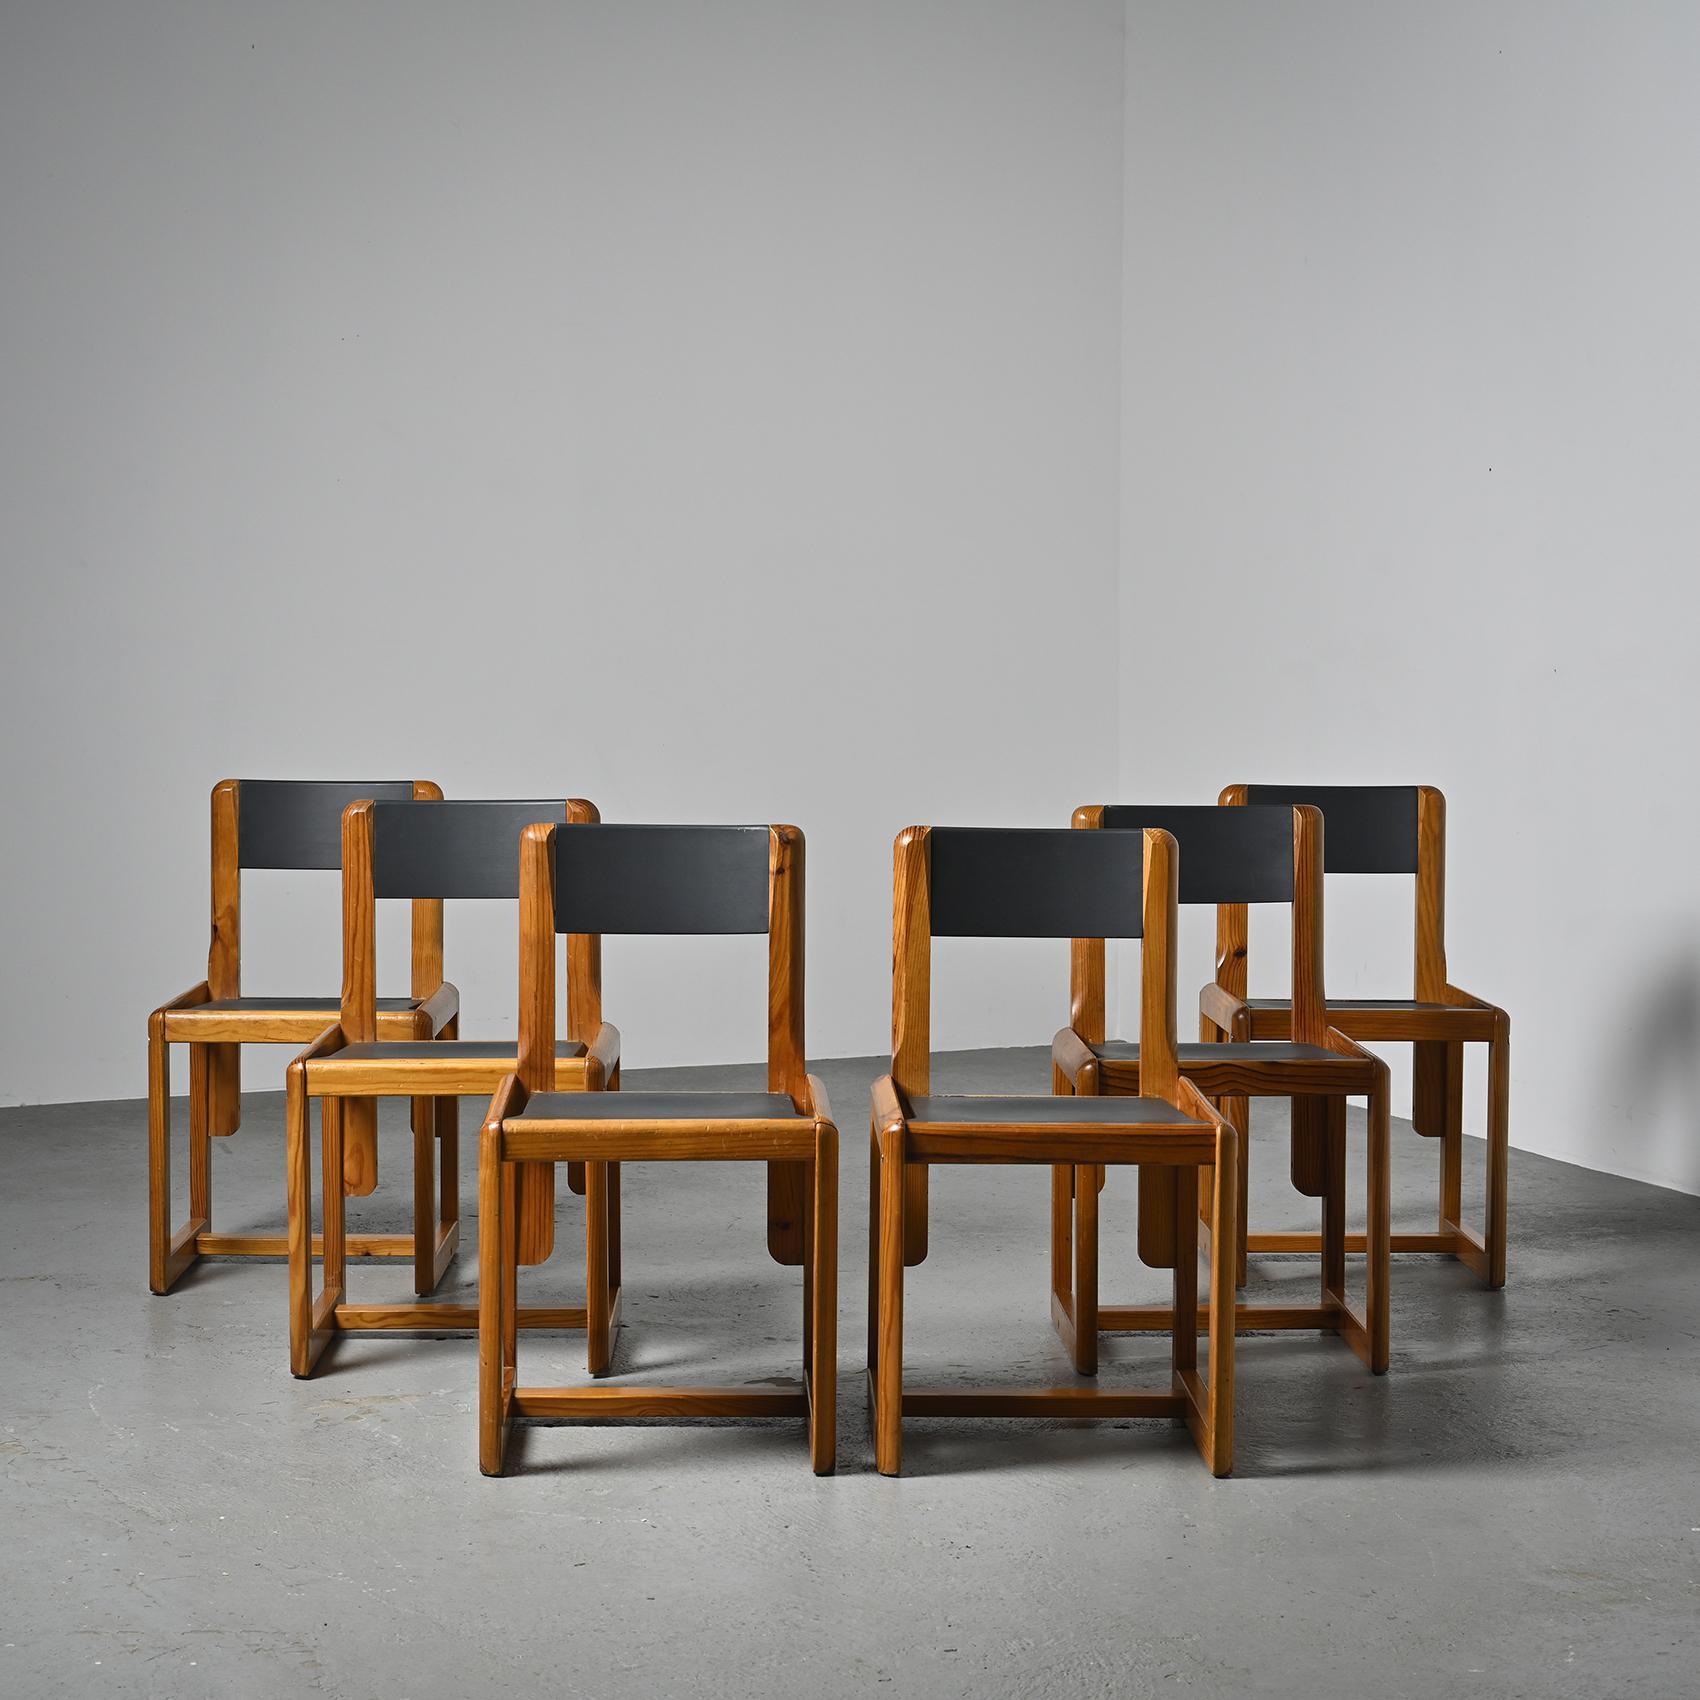 Rare set of six chairs by the cabinetmaker and designer from Lyon André Sornay.

Solid pine uprights assembled by threaded rods, a system patented by Sornay himself, with anthracite grey lacquered wood seat and back.

Entirely